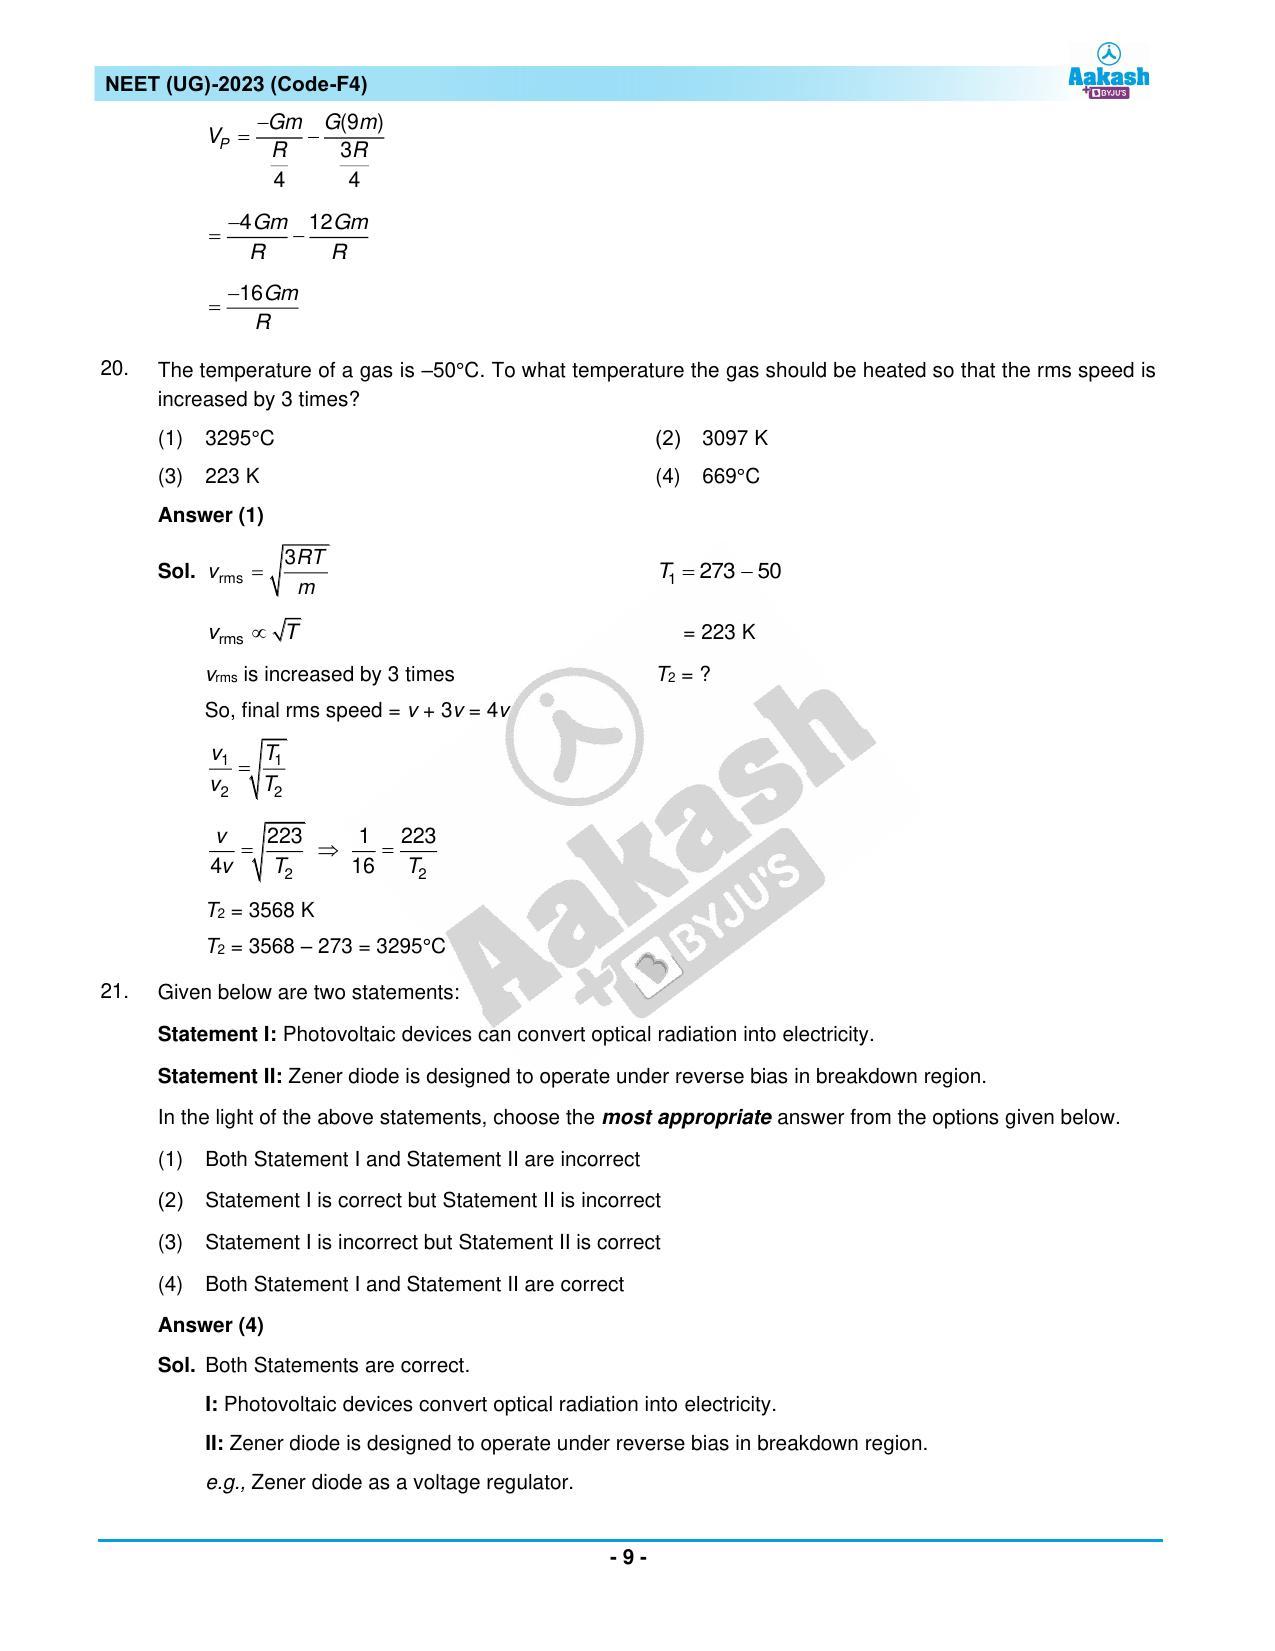 NEET 2023 Question Paper F4 - Page 9